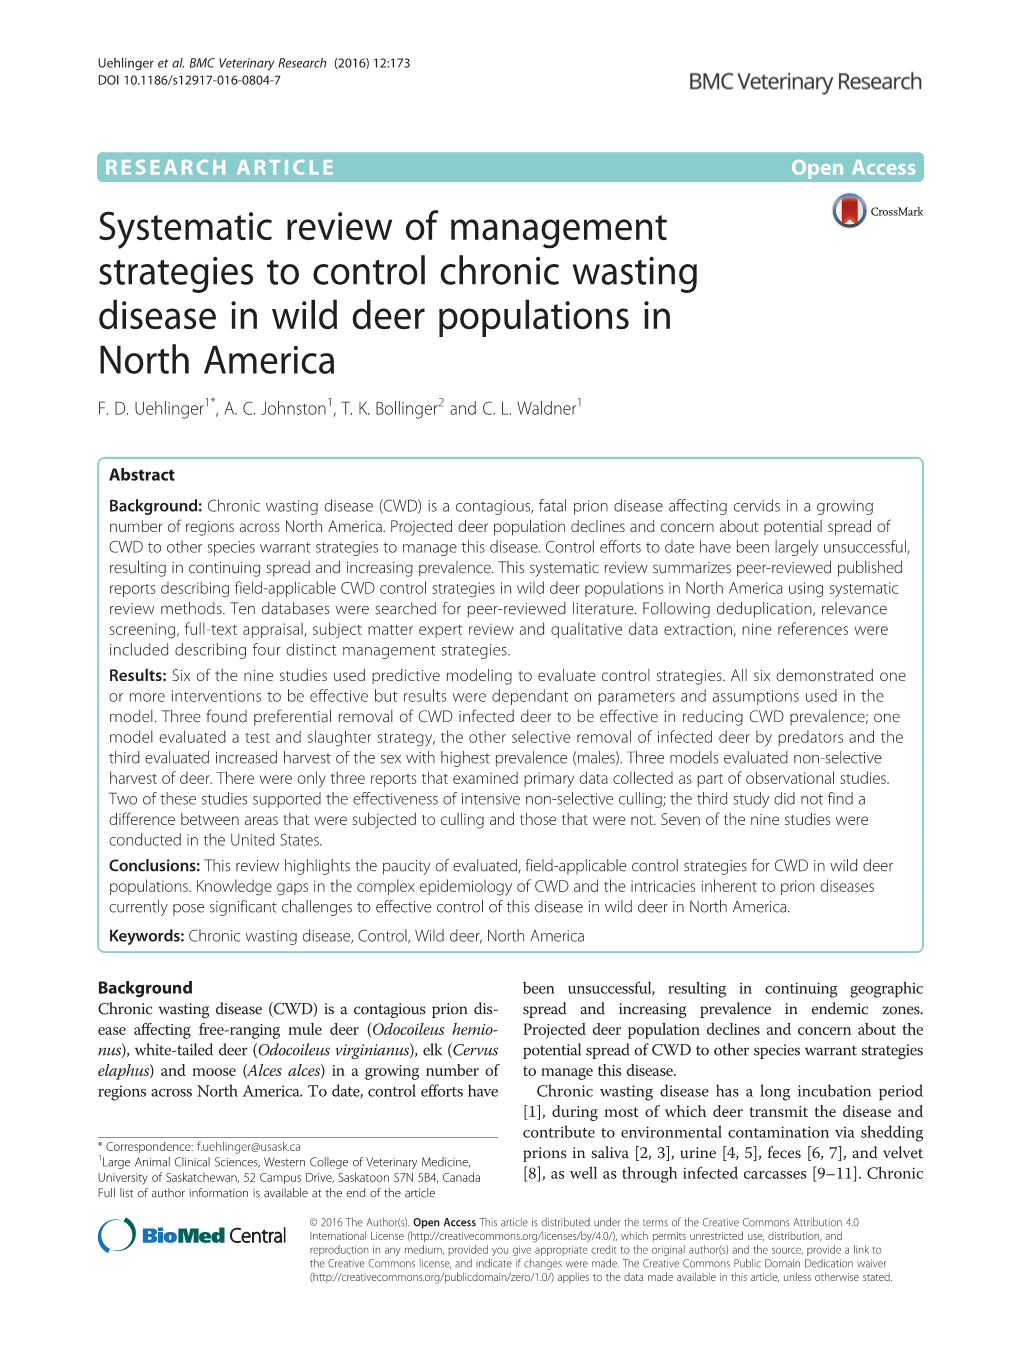 Systematic Review of Management Strategies to Control Chronic Wasting Disease in Wild Deer Populations in North America F